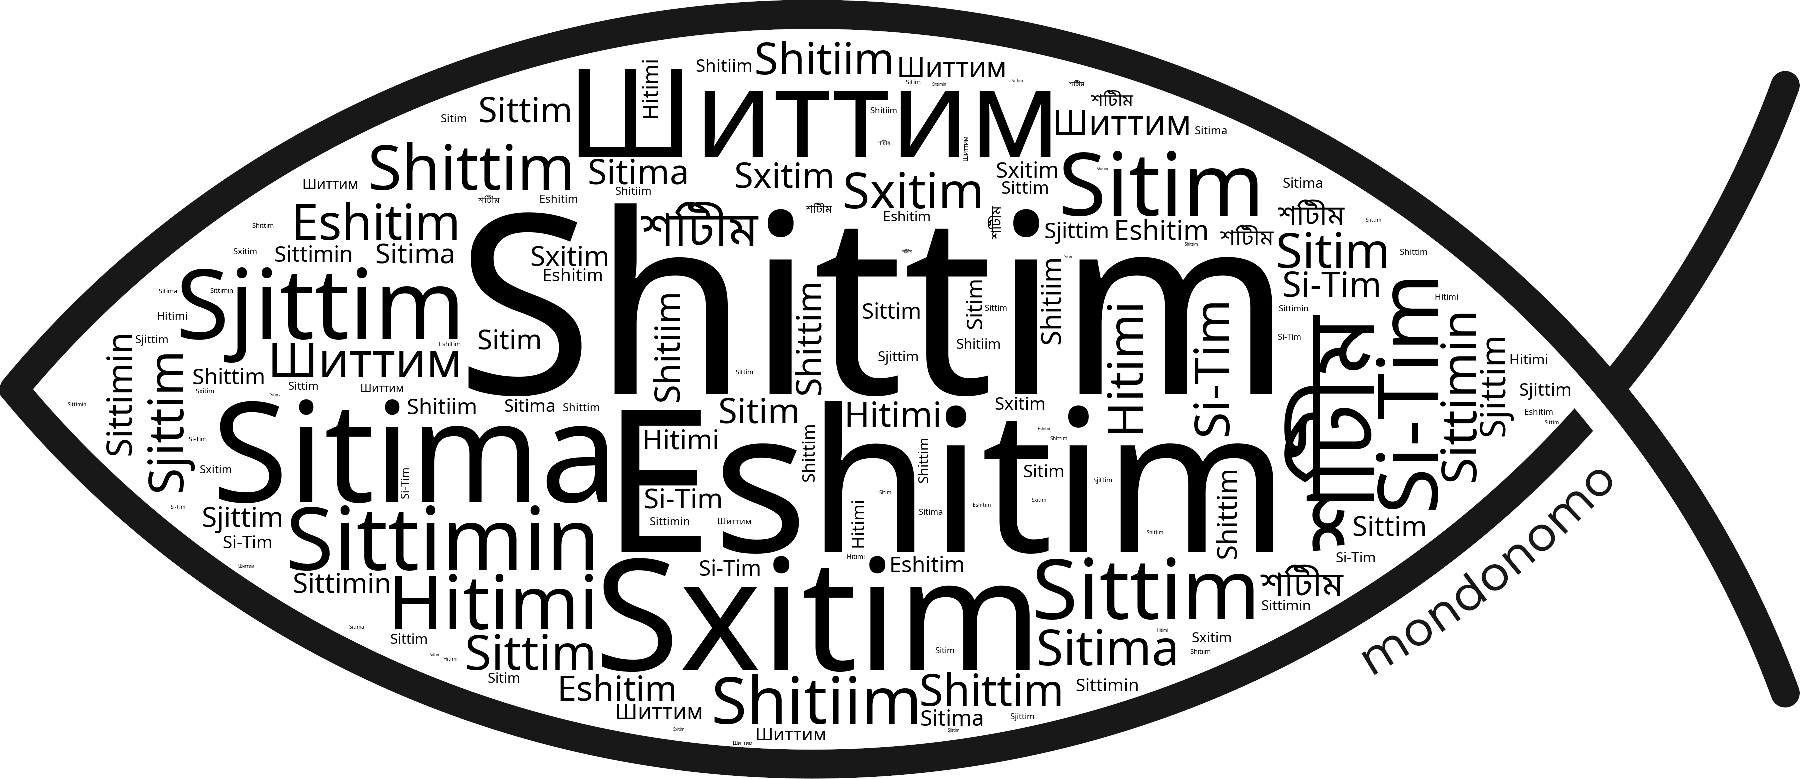 Name Shittim in the world's Bibles